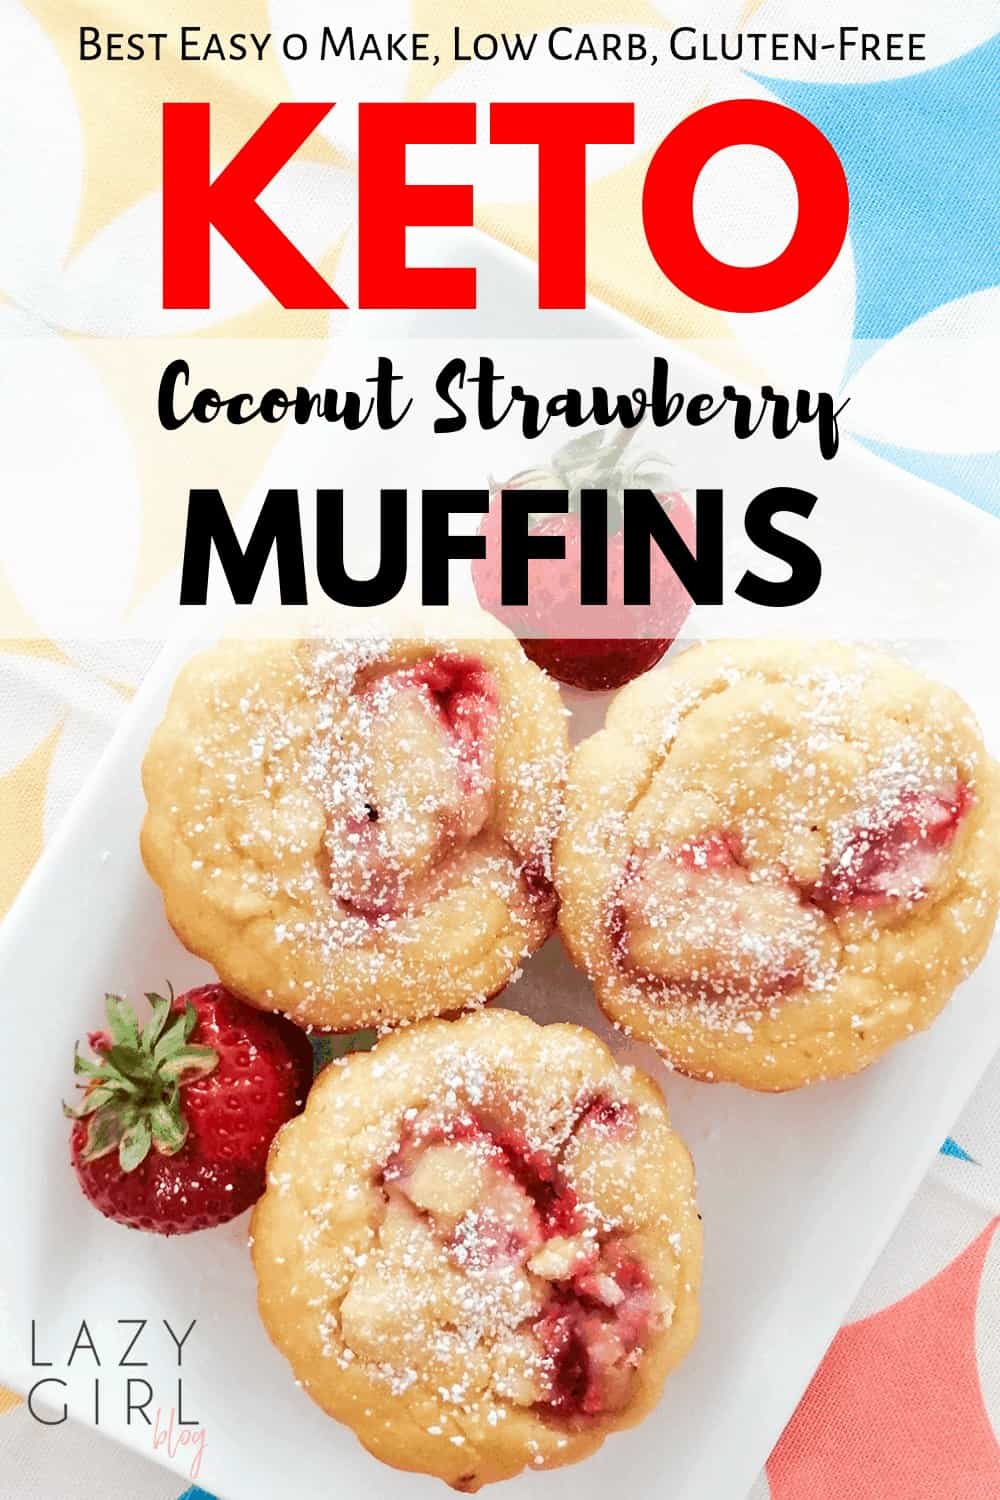 Keto Coconut Strawberry Muffins are easy, healthy coconut flour muffins. They are a moist and delicious grab and go breakfast or snack option that is packed with fresh strawberries! These sweet strawberry muffins are tasty enough to be enjoyed by everyone! #ketomuffins #coconutflourmuffins #strawberrymuffins #easyketomuffins